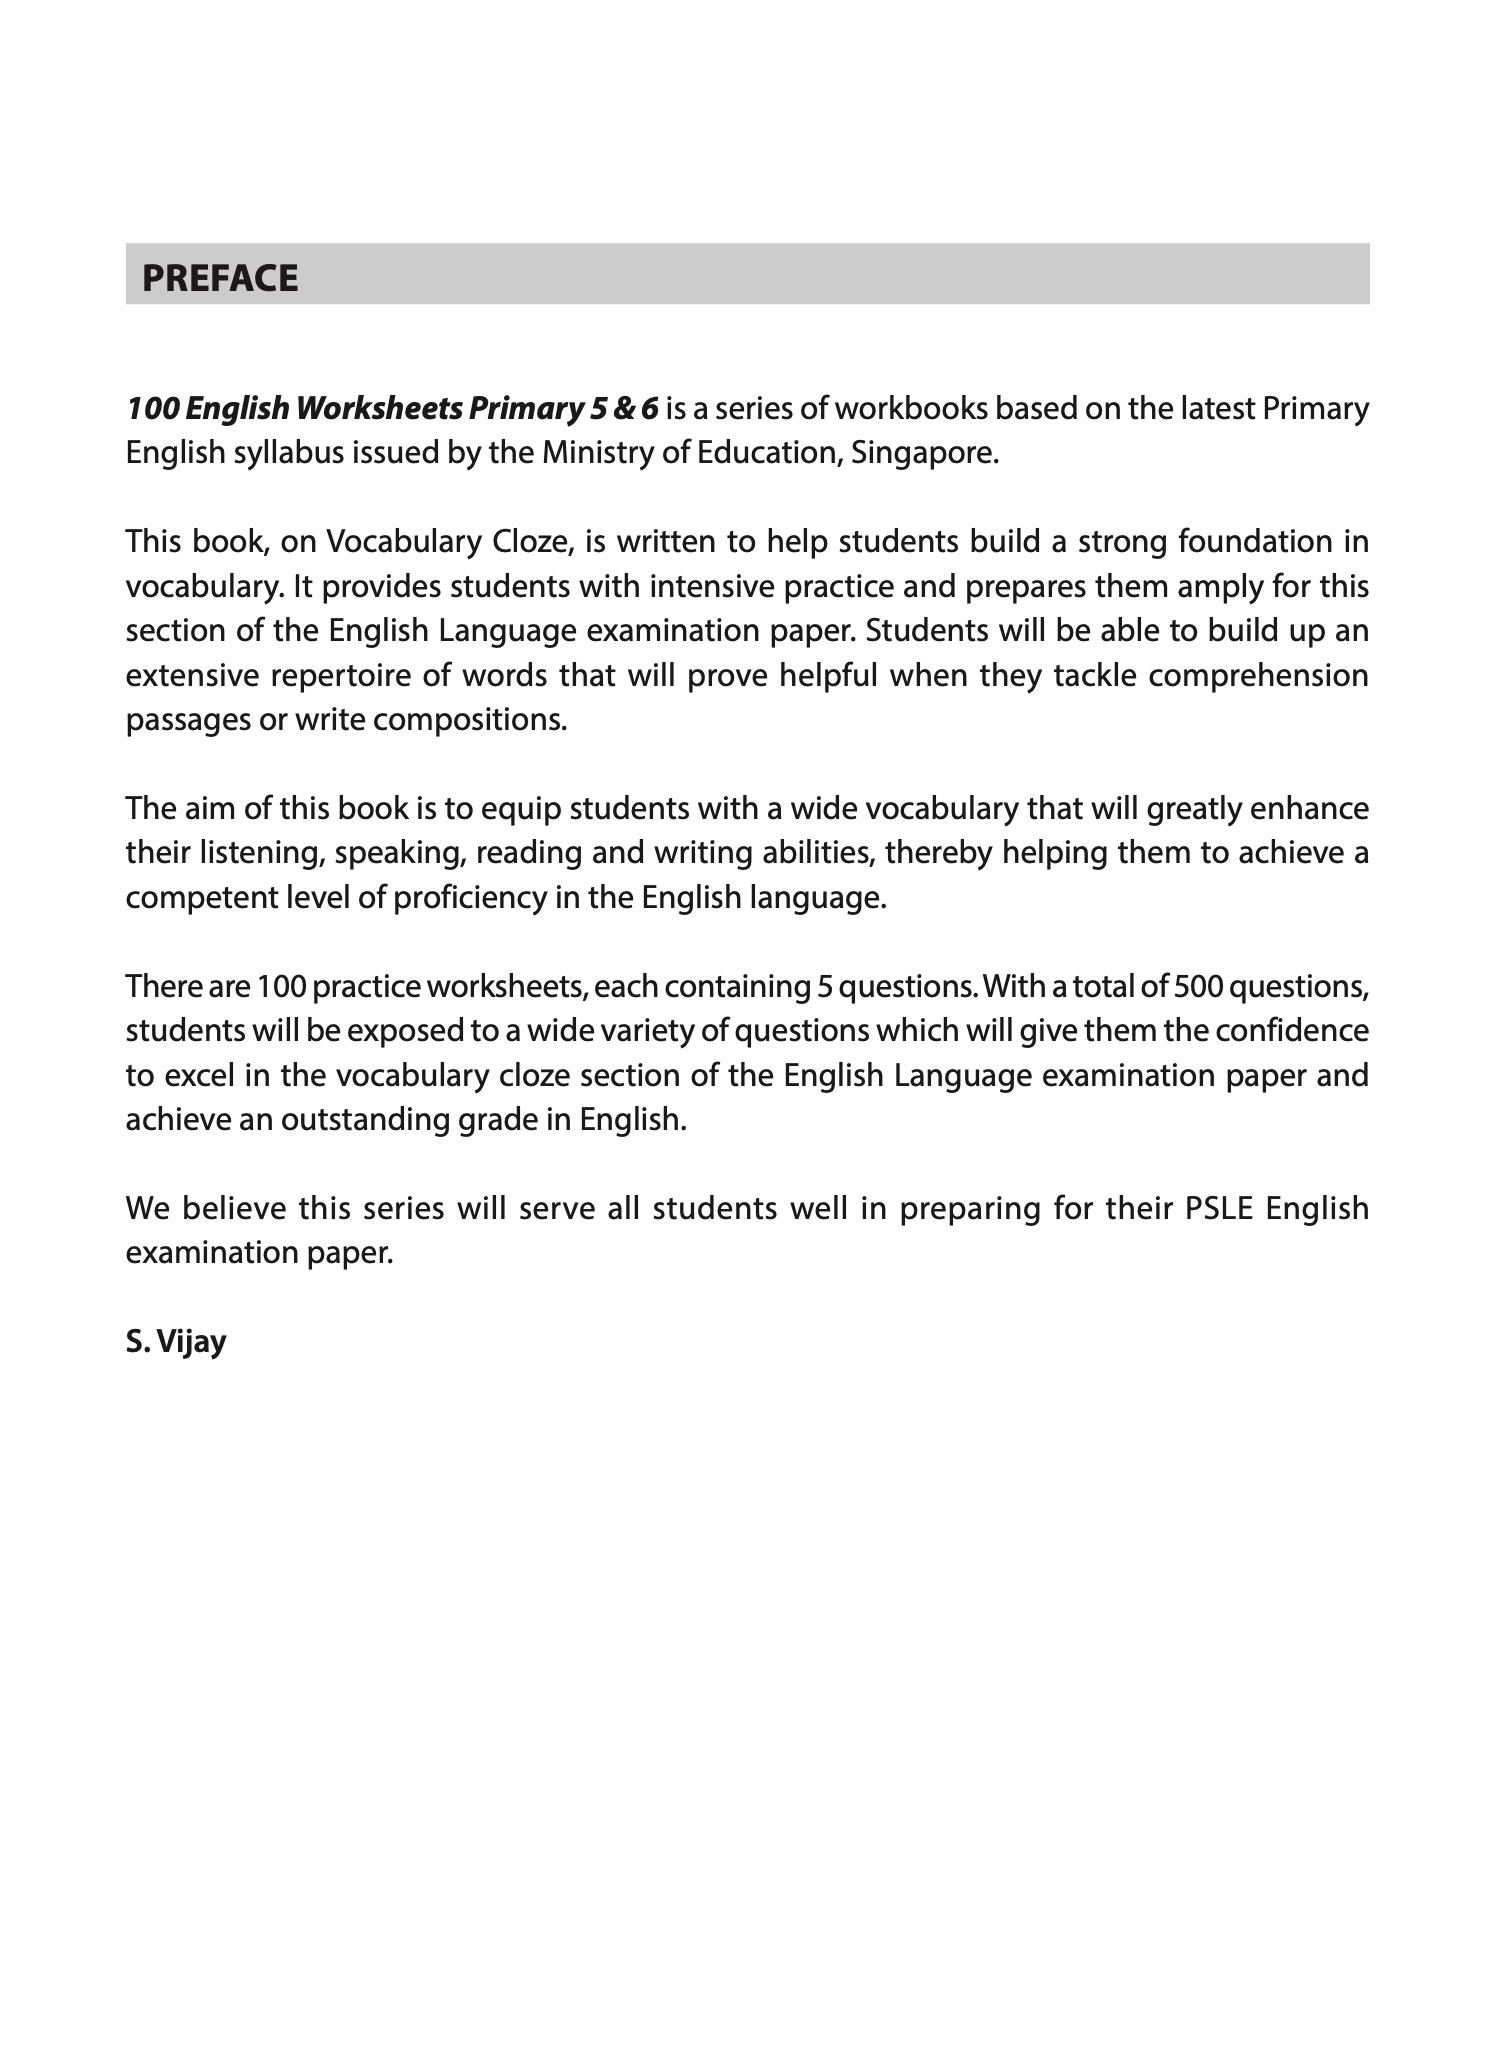 100 English Worksheets Primary 5 6 Vocabulary Cloze CPD Singapore Education Services Pte Ltd